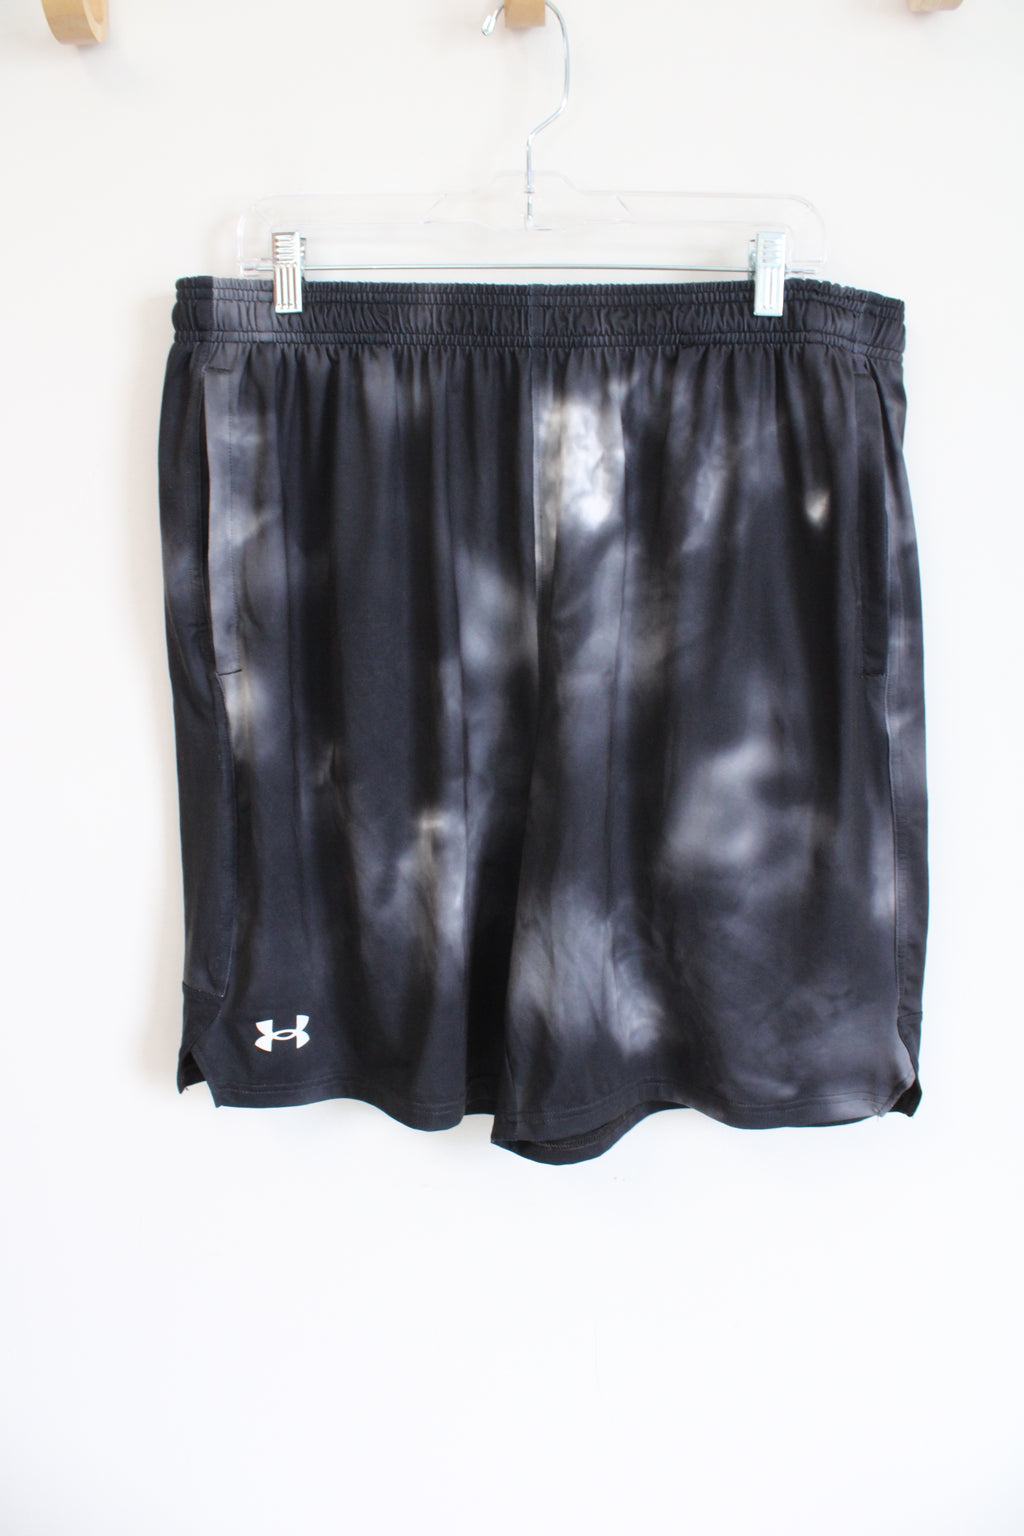 Under Armour Loose Fit Gray Tie Dye Shorts | XL